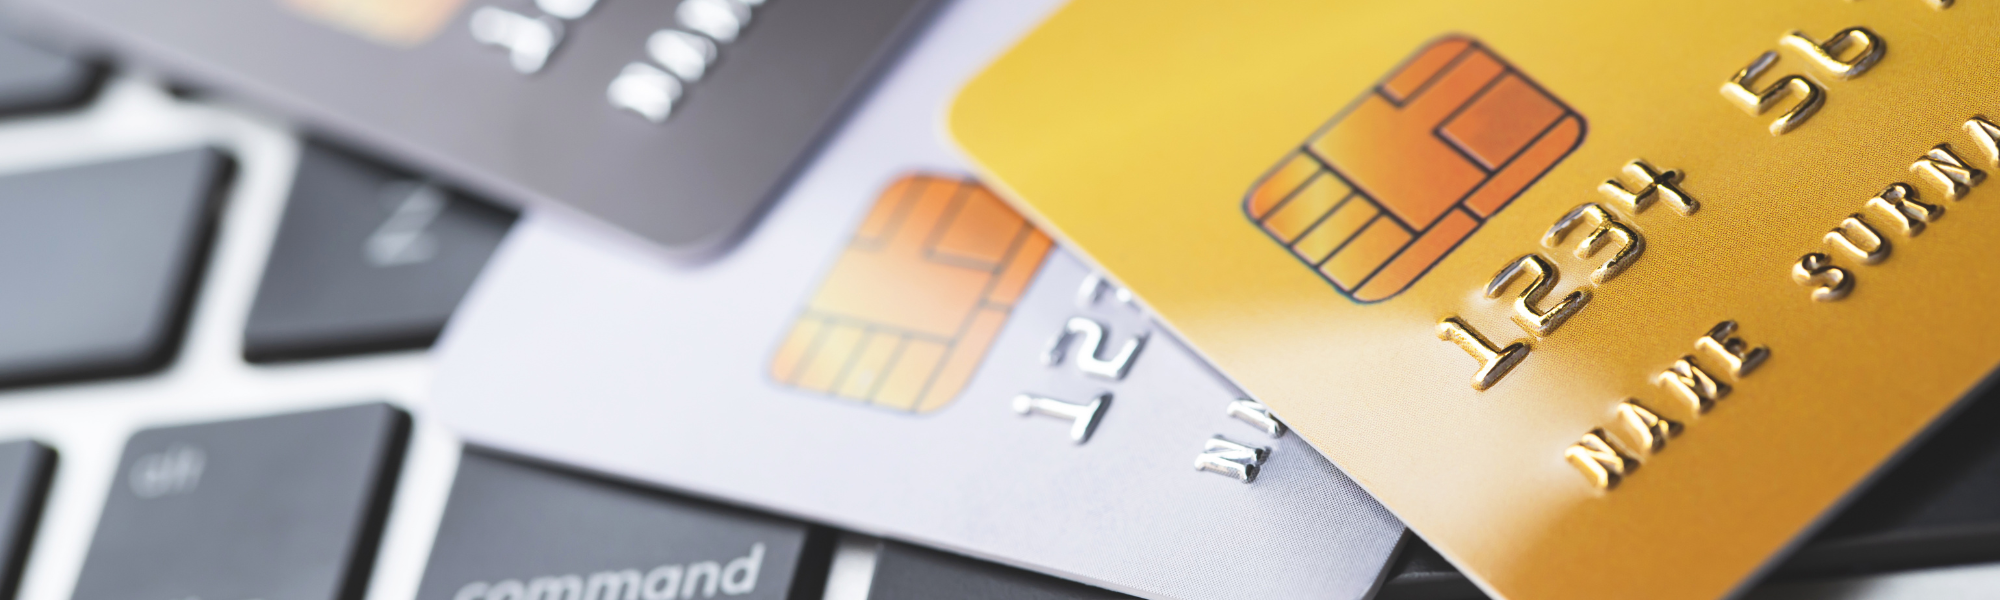 Payment Card Fraud - The Calm Before the Storm?